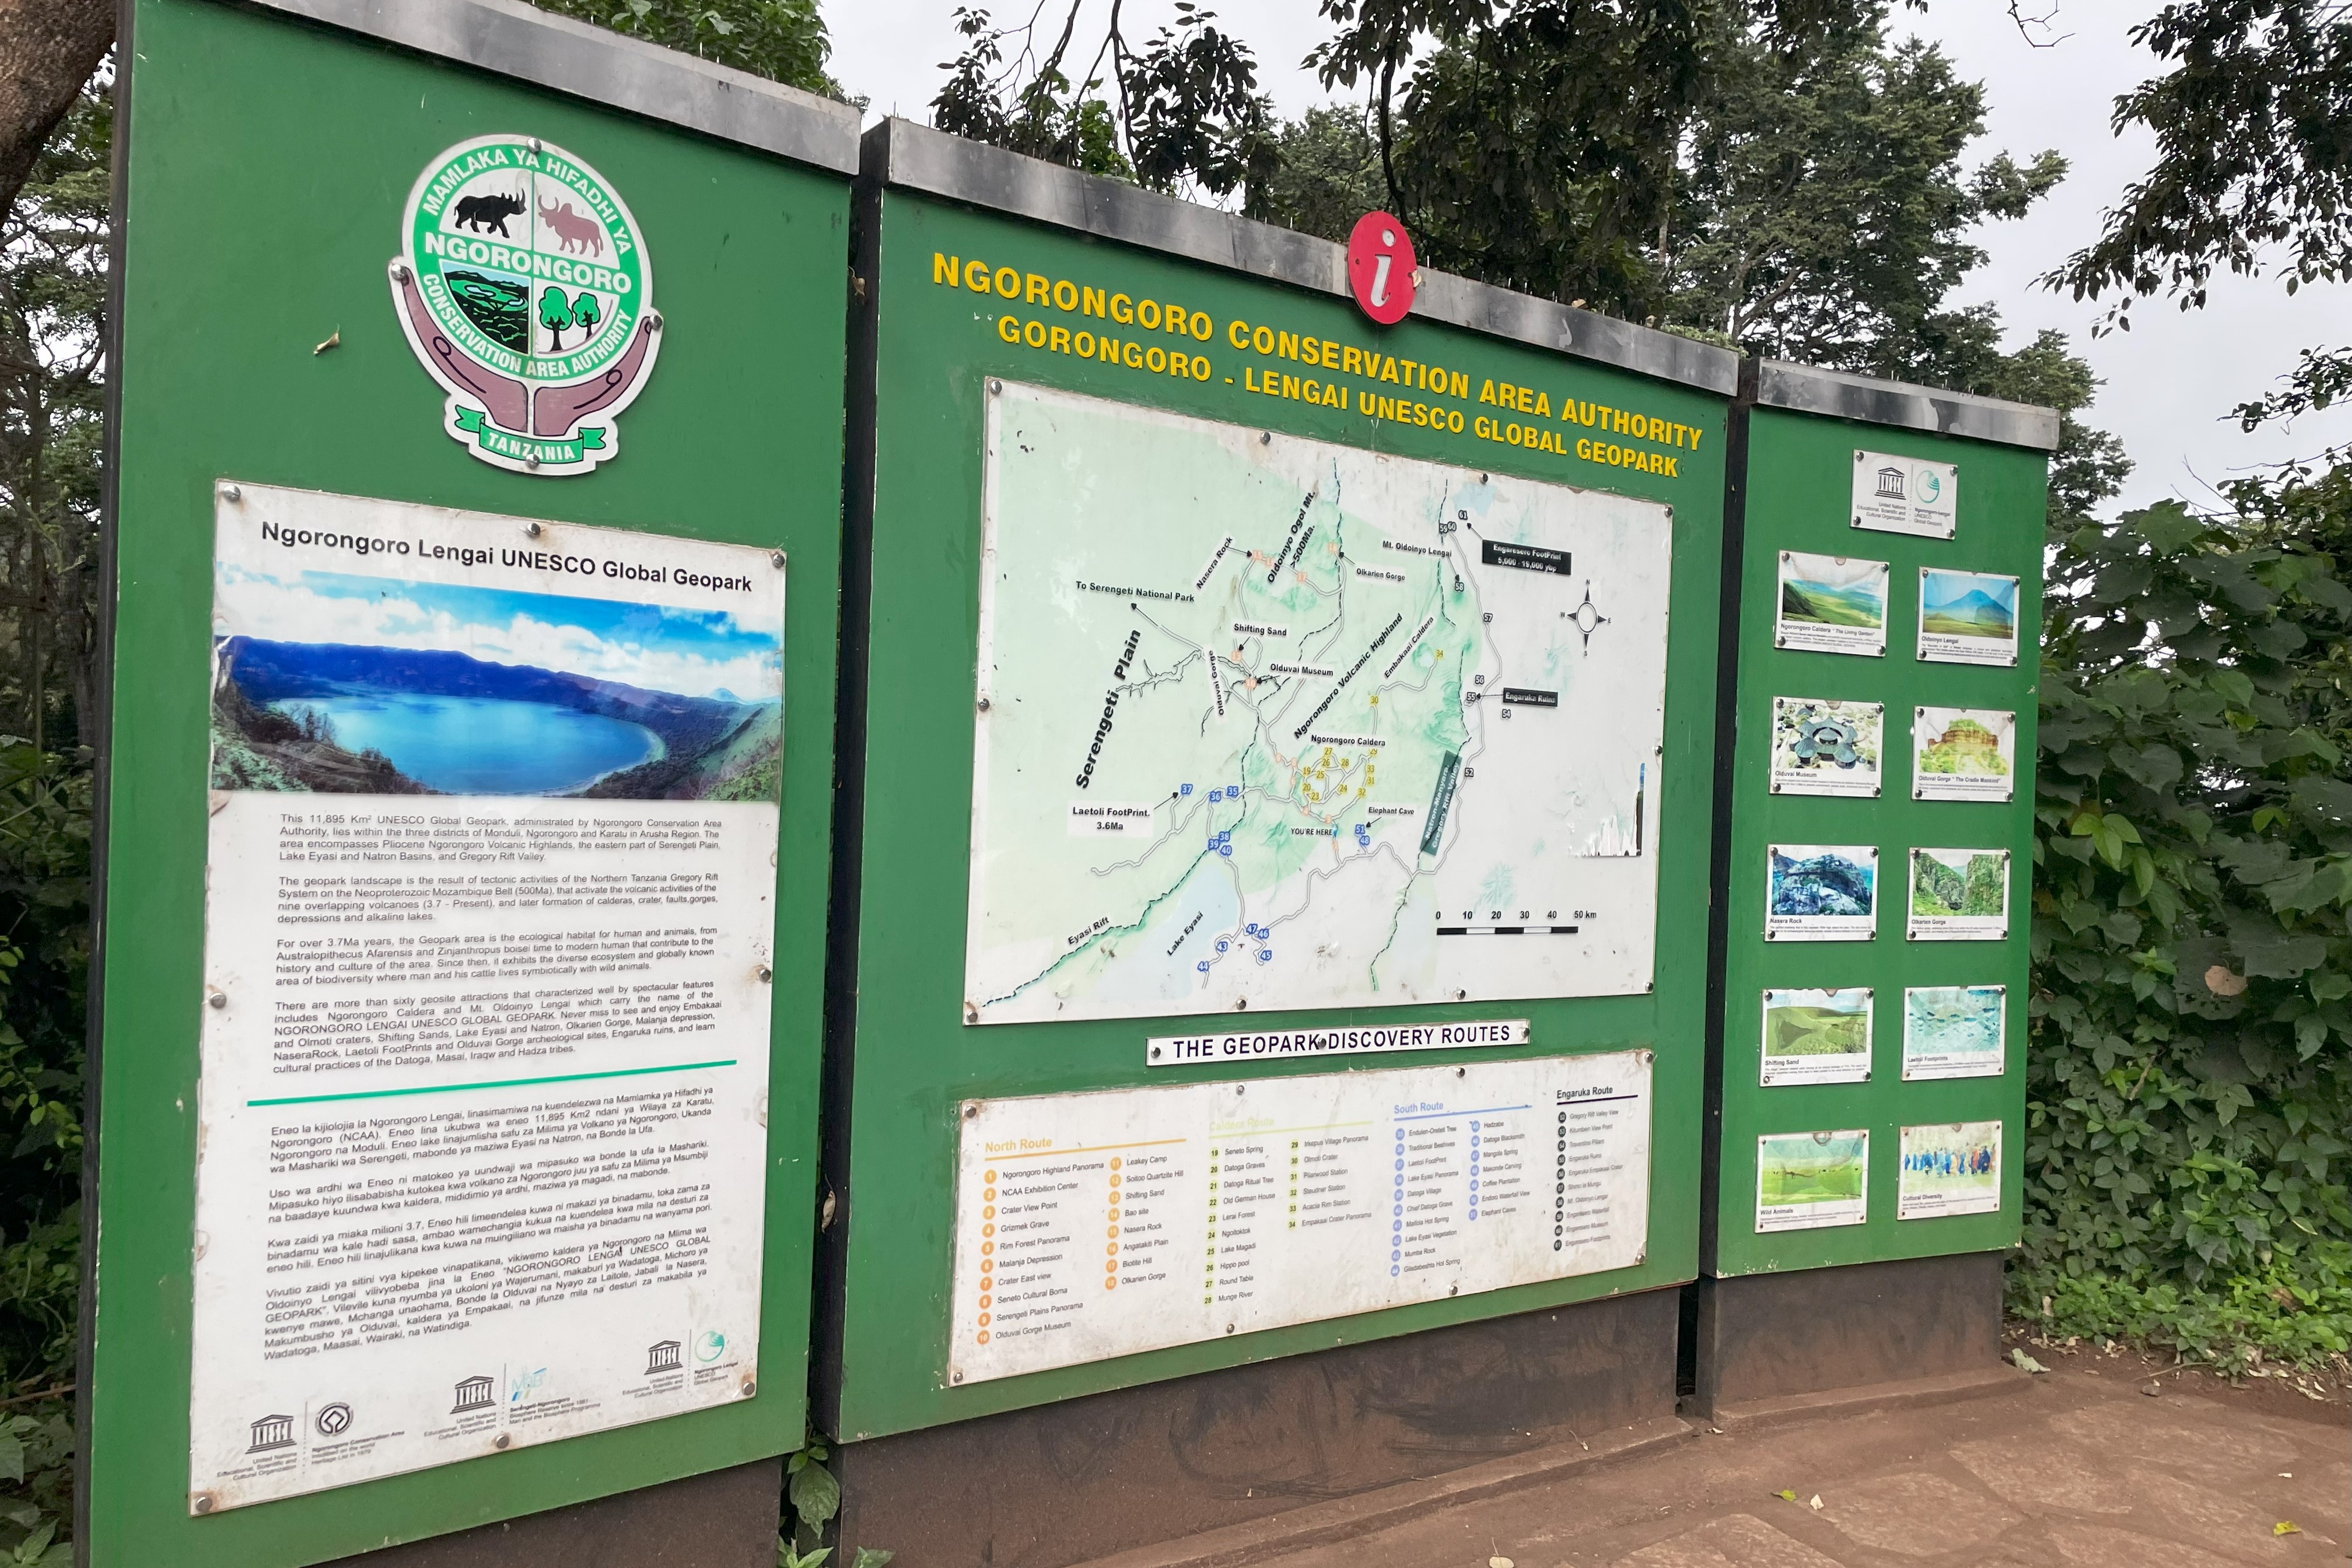 A large green sign with a map and tourist information for the Ngorongoro Conservation Area